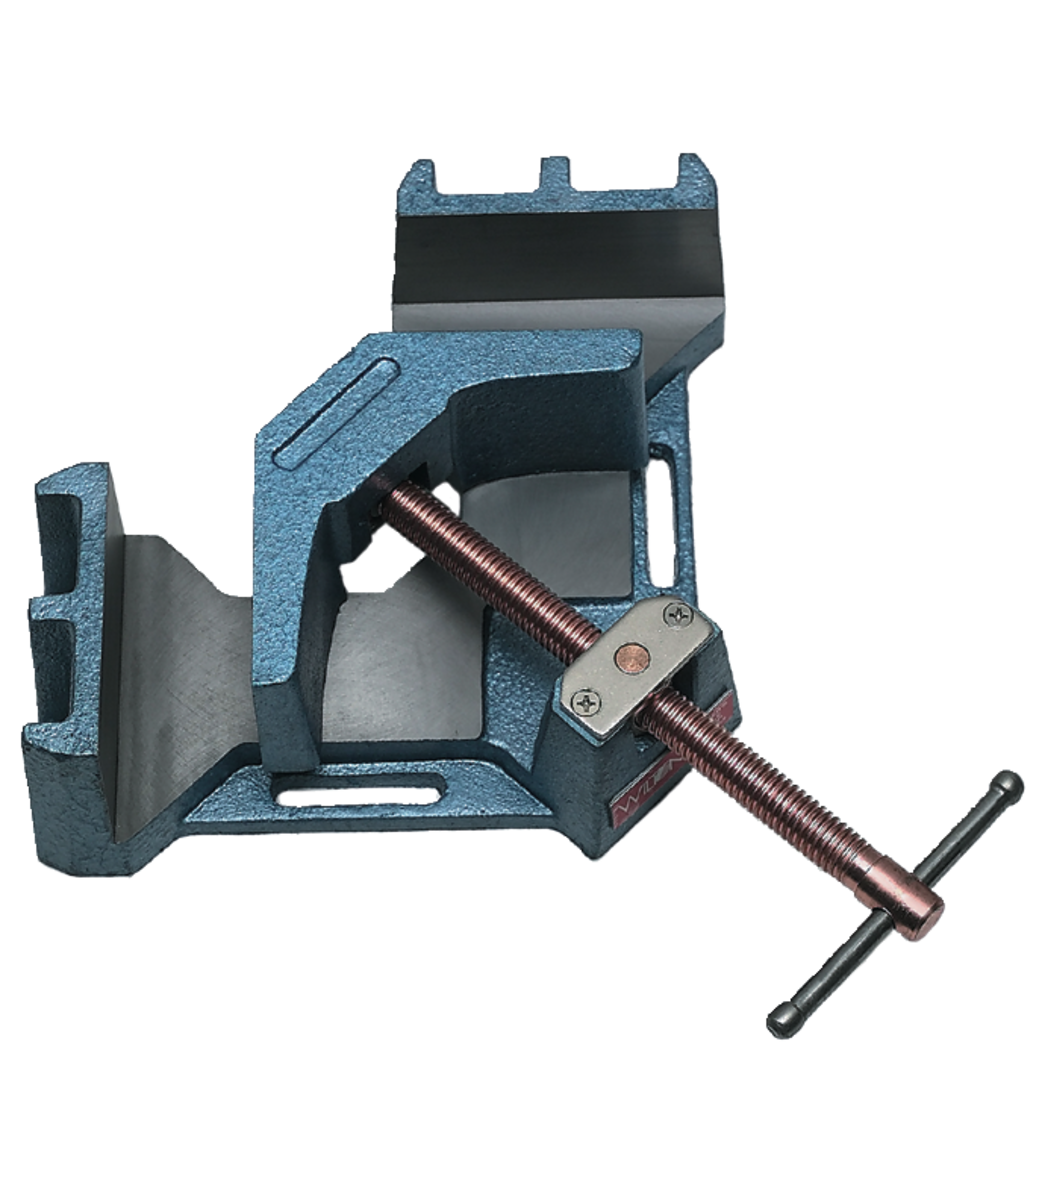 AC-325, 90° Angle Clamp, 3-11/32" Miter Capacity, 1-3/8" Jaw Height, 4-1/8" Jaw Length